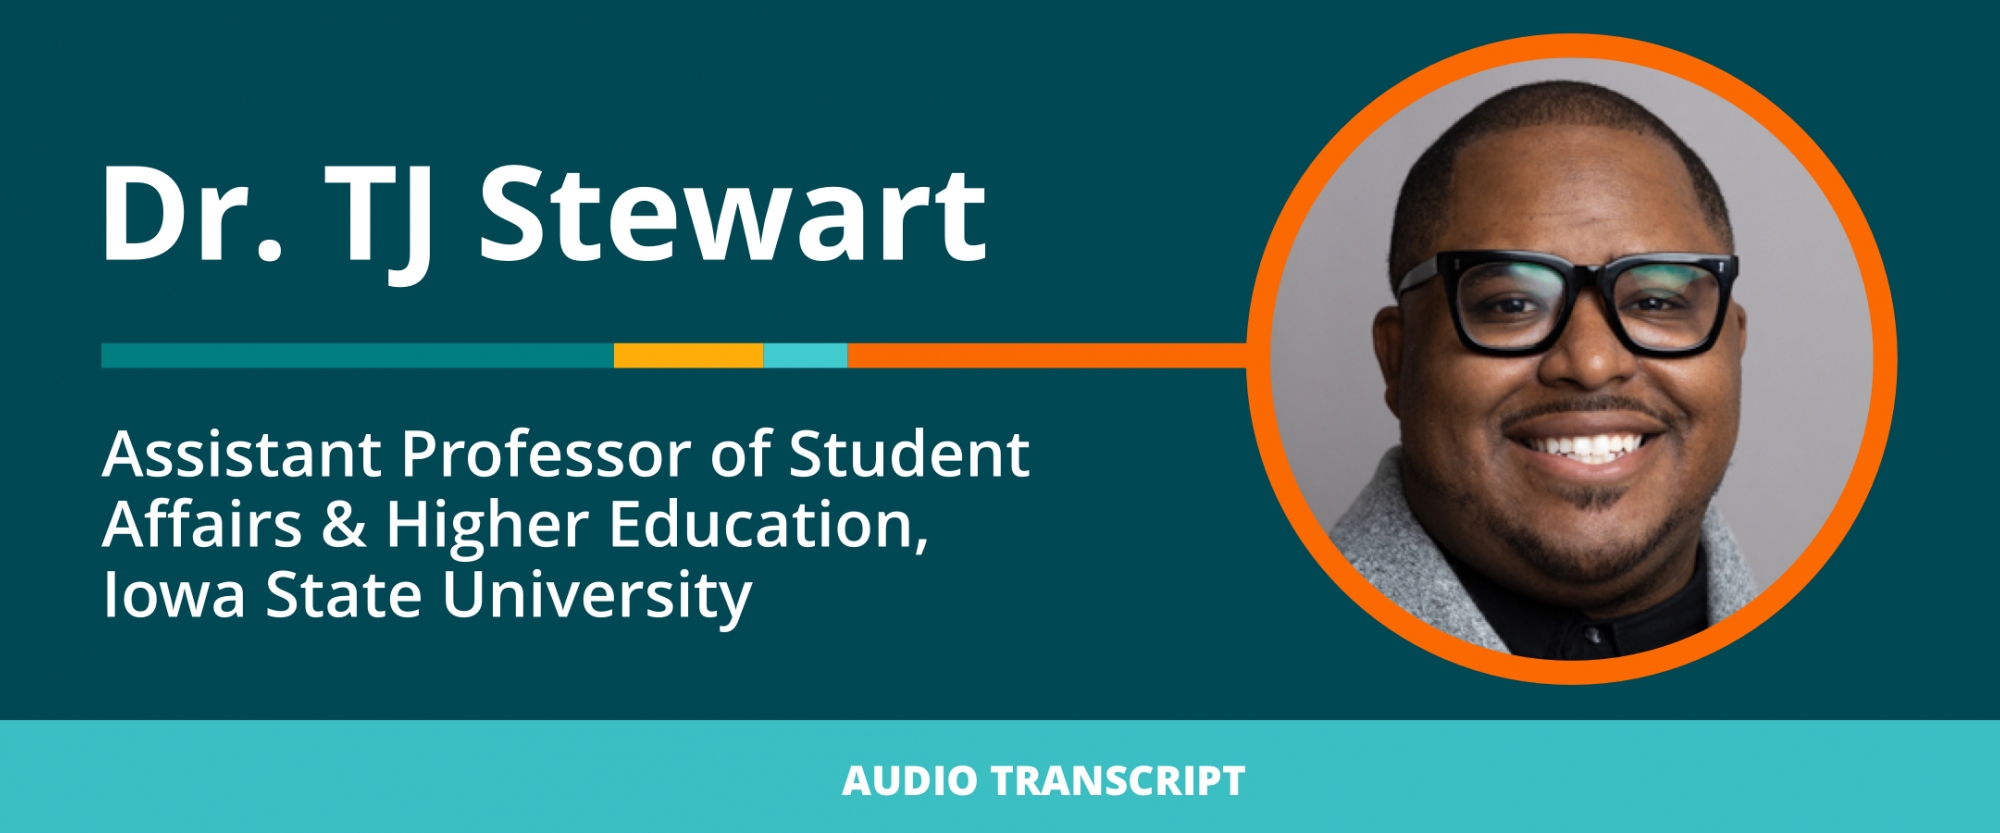 Scholarship to Practice 8/19/21: Transcript of Conversation With TJ Stewart, Assistant Professor of Student Affairs & Higher Education, Iowa State University